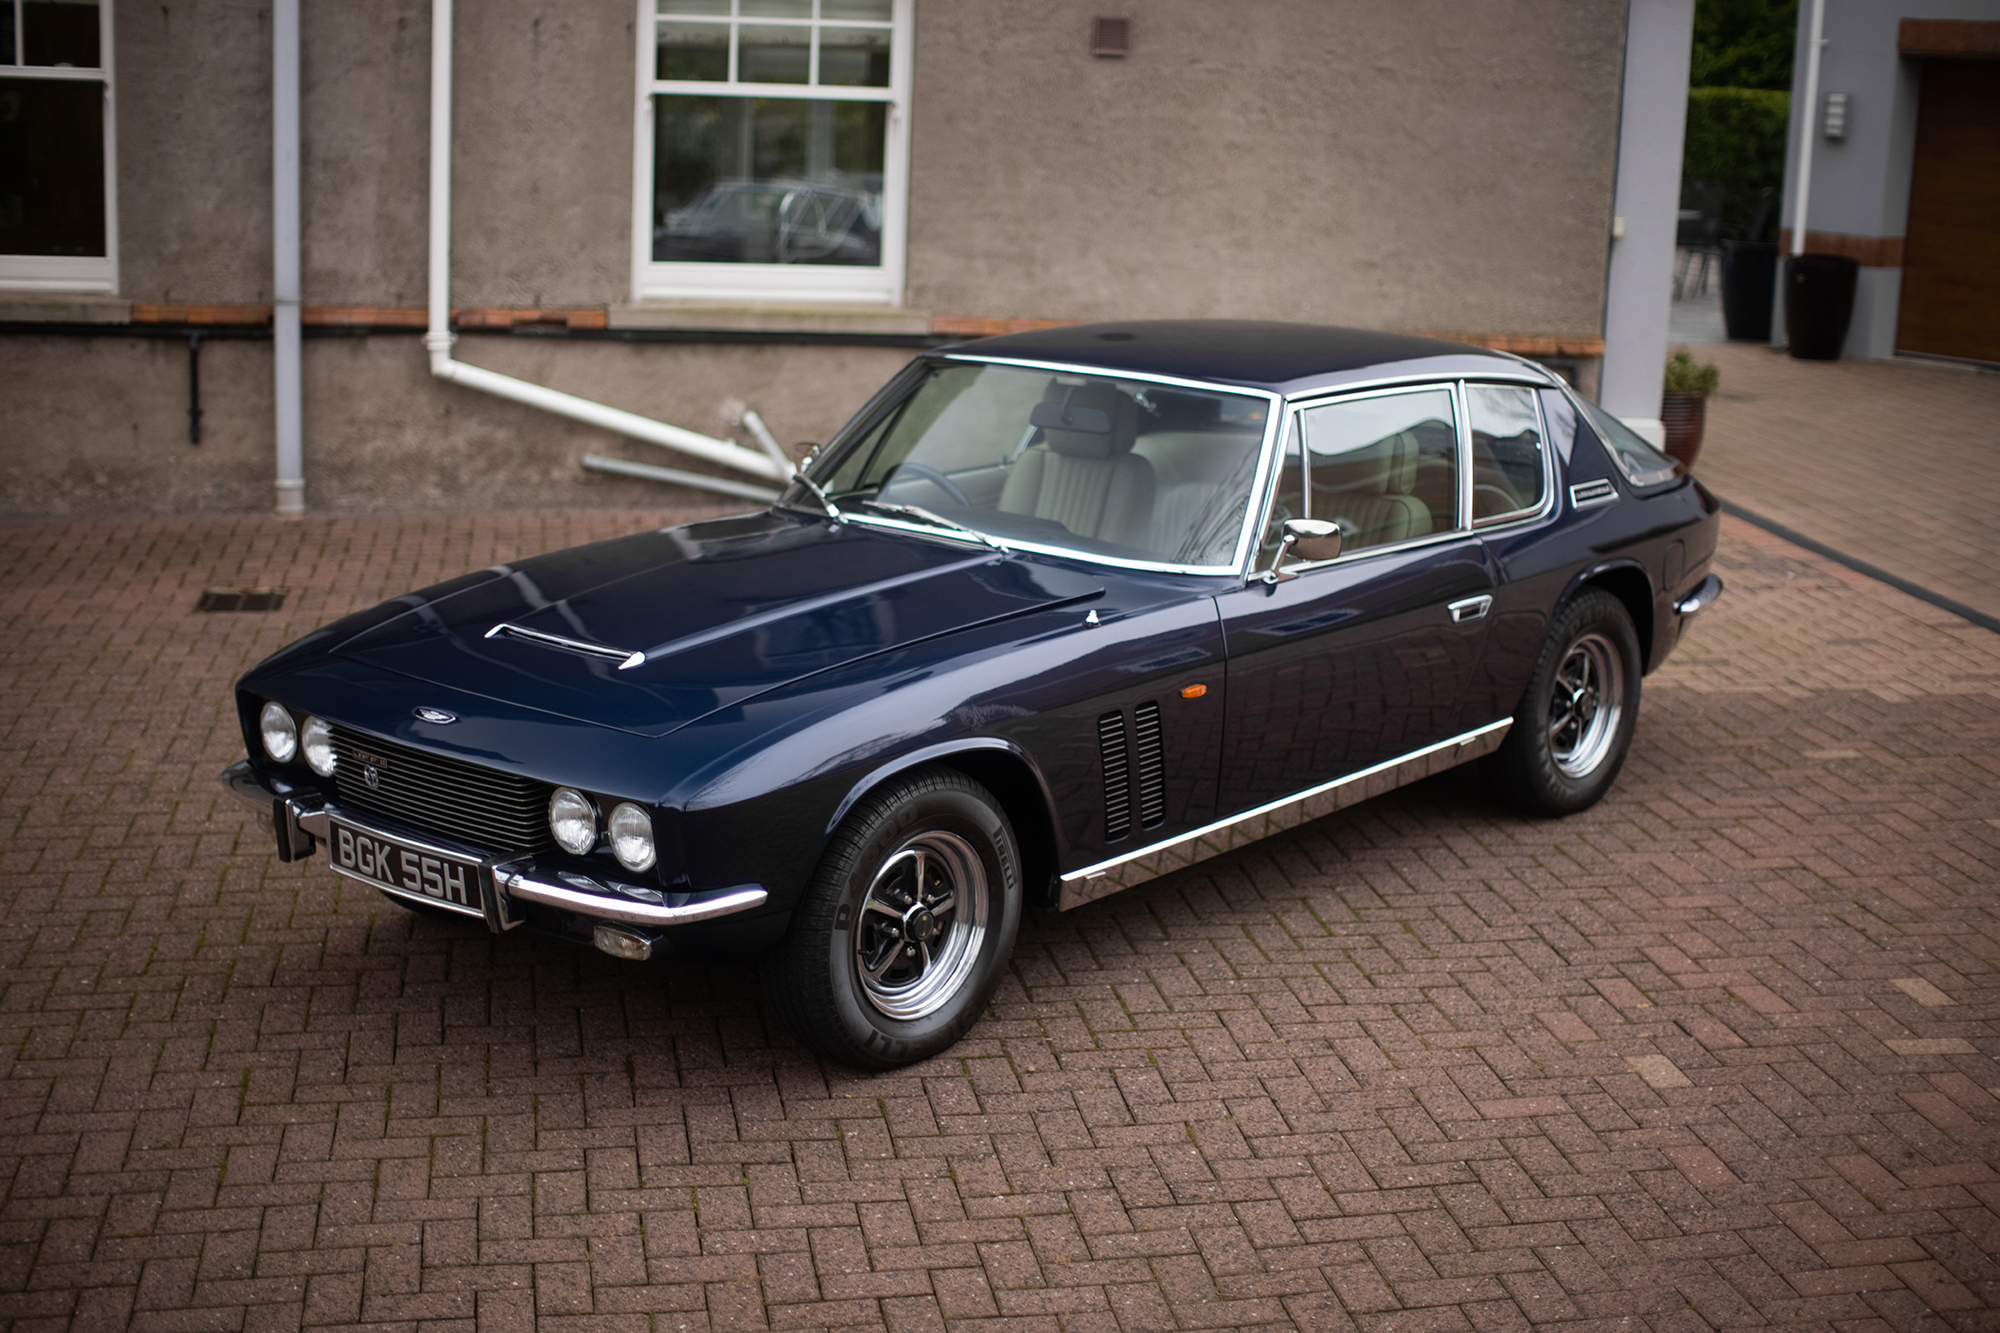 1970 Jensen FF for sale by classified listing privately in Belfast 